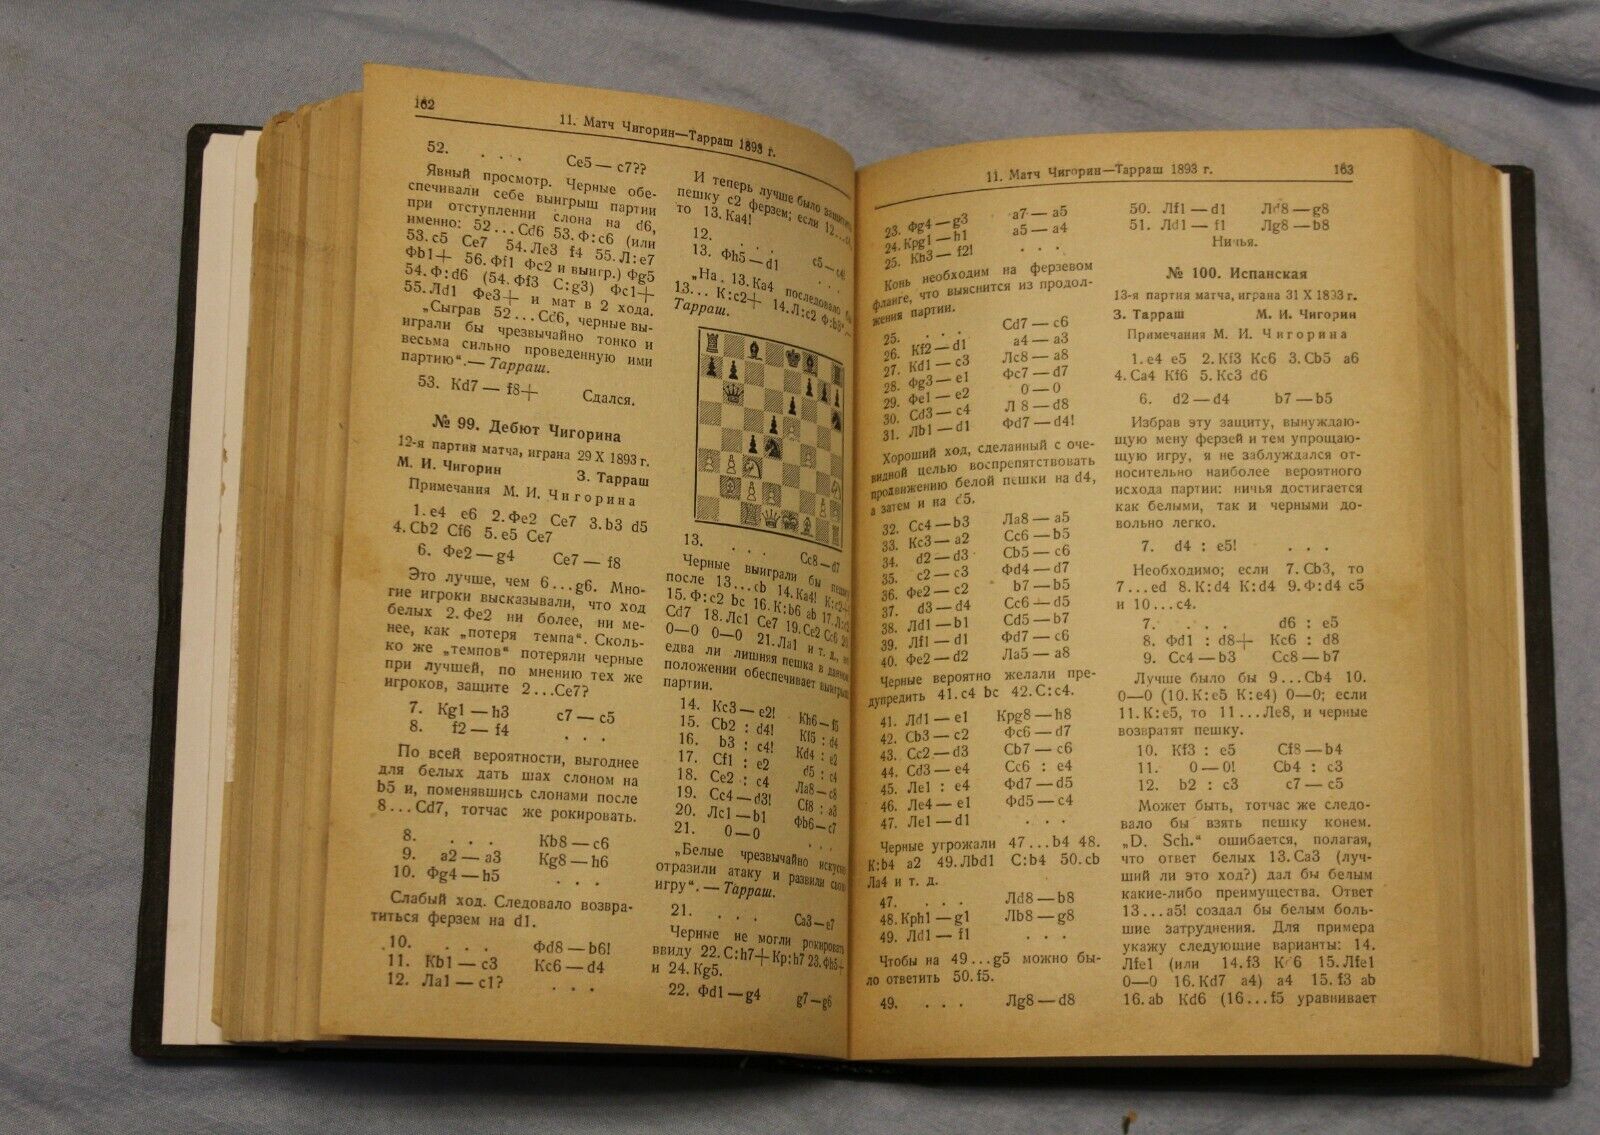 10783.Antique Chess Book. N. Grekov. M. I. Chigorin. His life and work. 1939